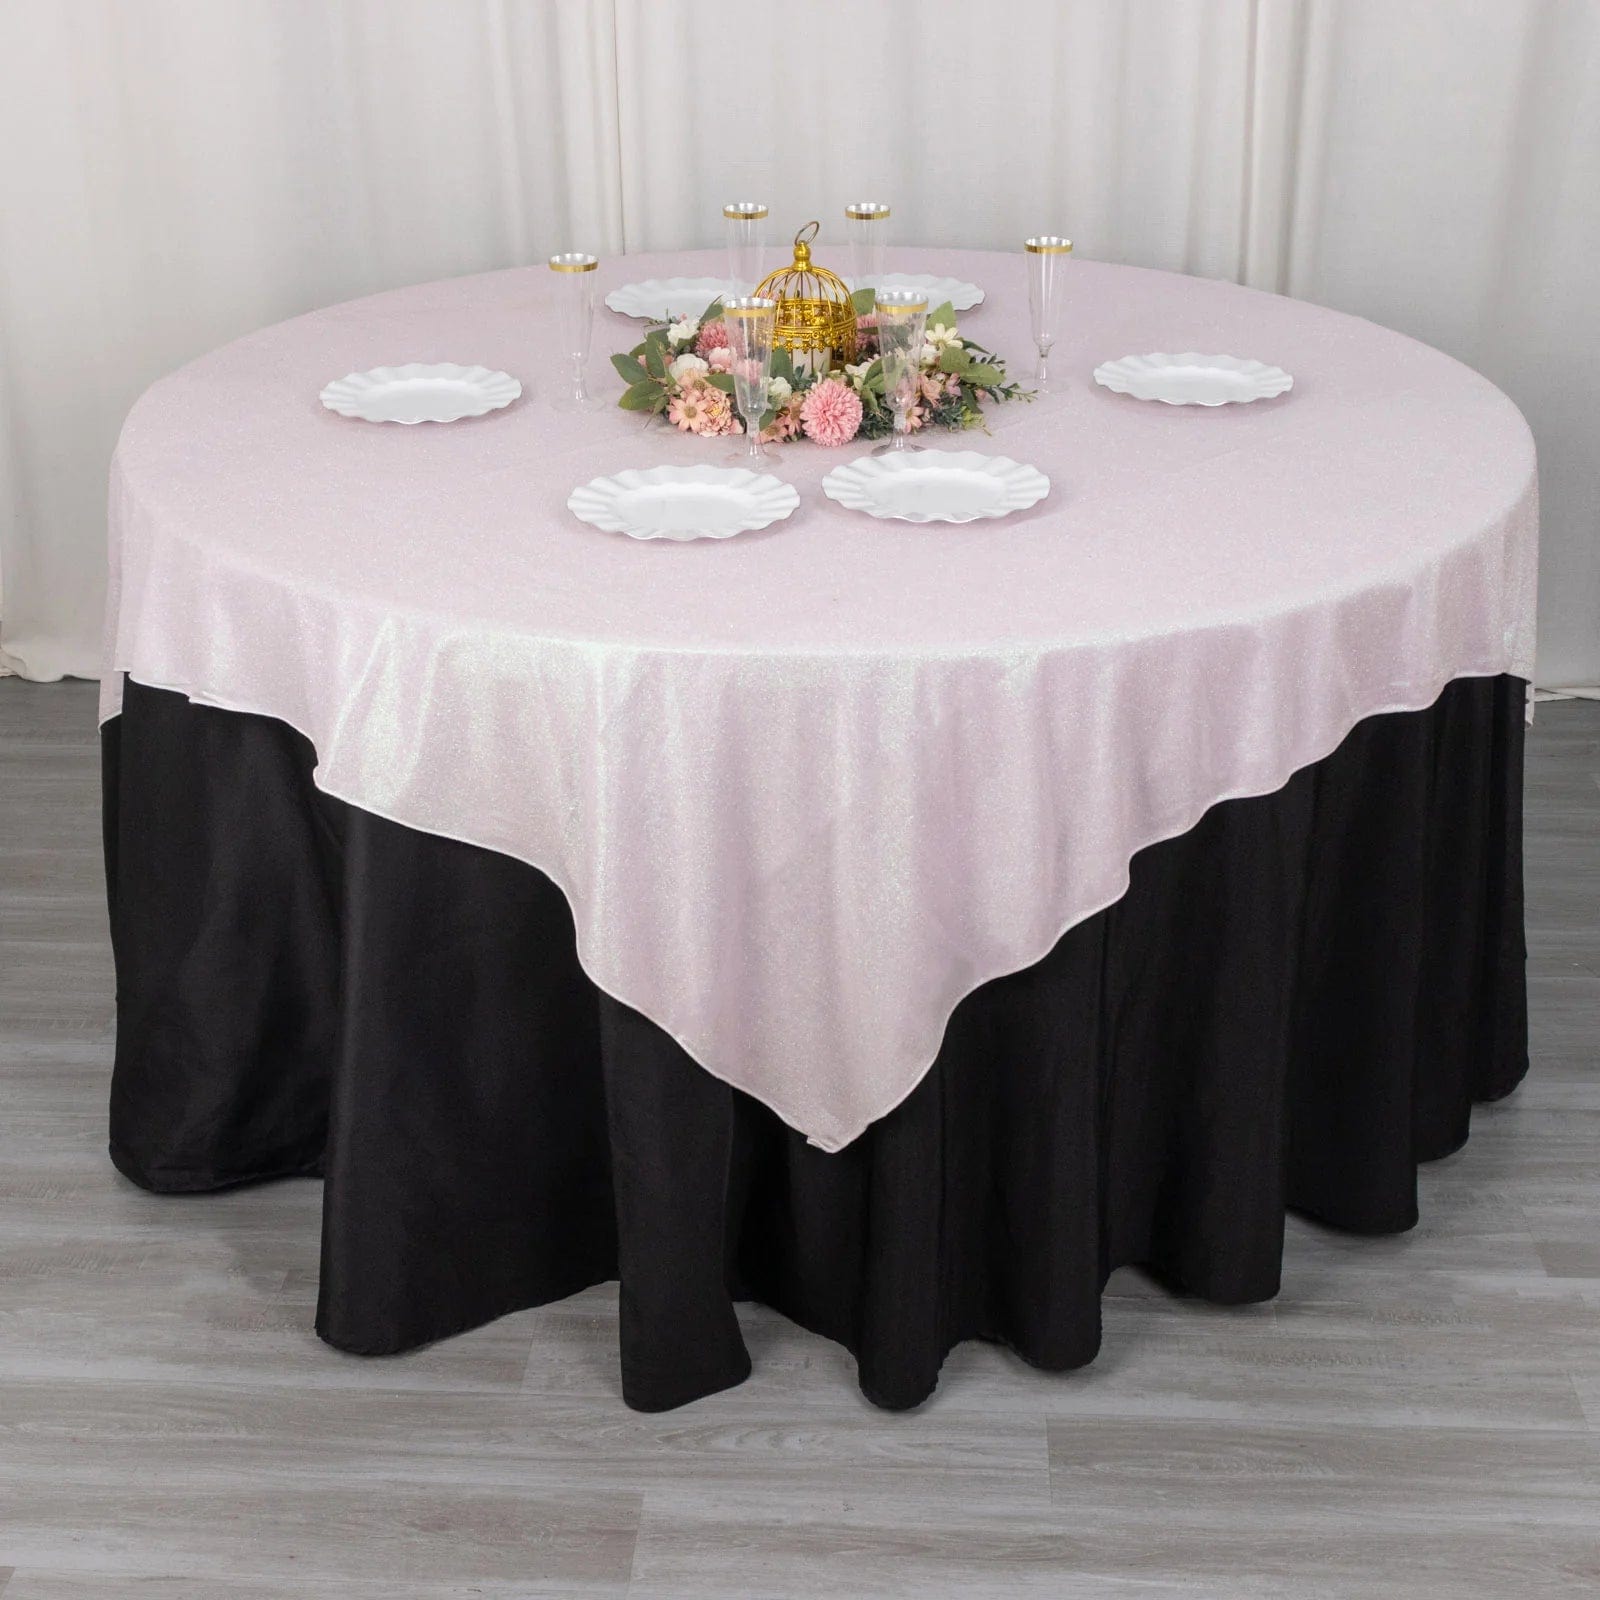 72x72 in Glittered Polyester Square Table Overlay